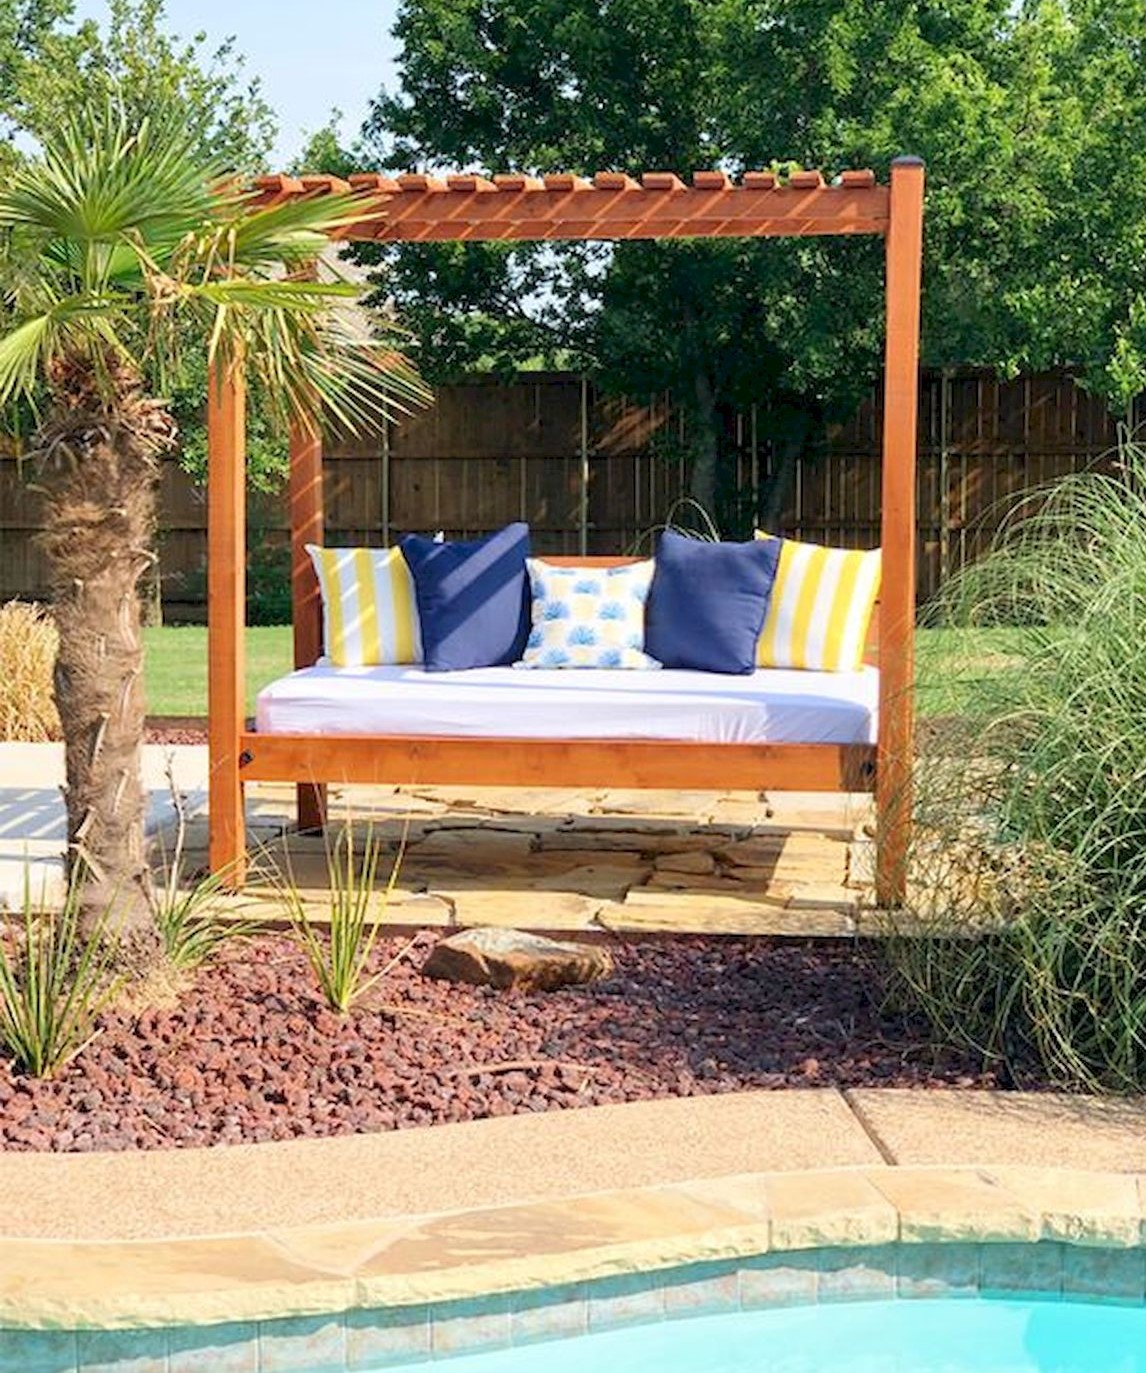 50 Amazing DIY Projects Outdoor Furniture Design Ideas (21)